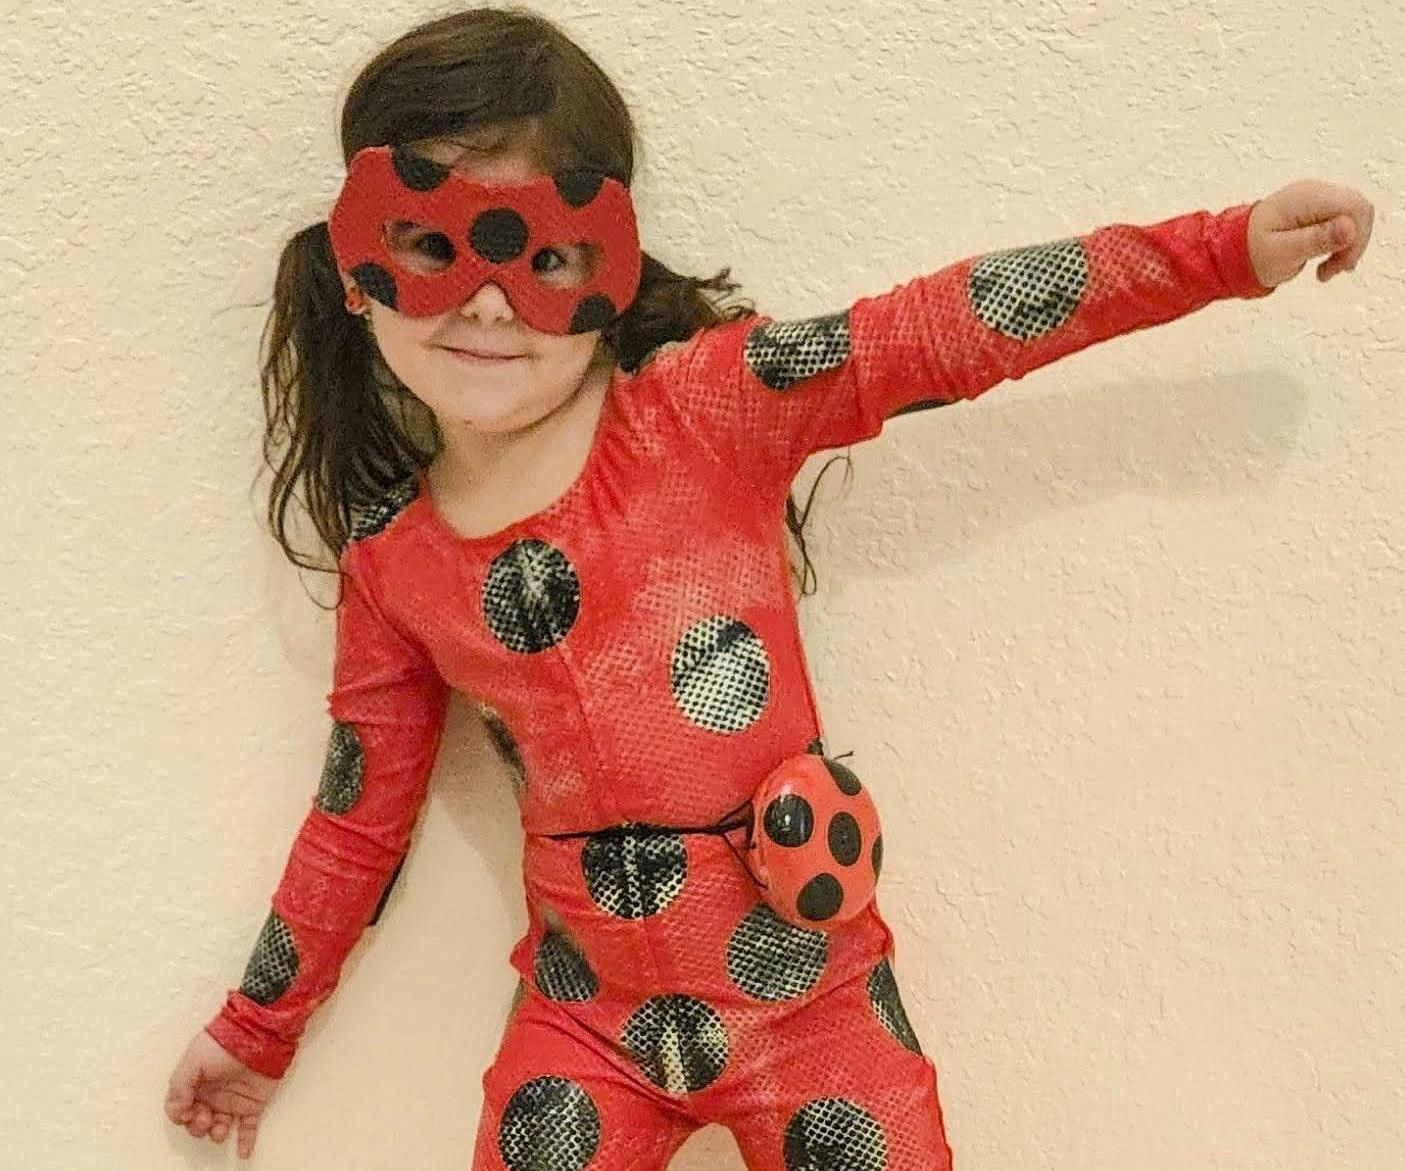 You Are Ladybug! and You Can Do It!